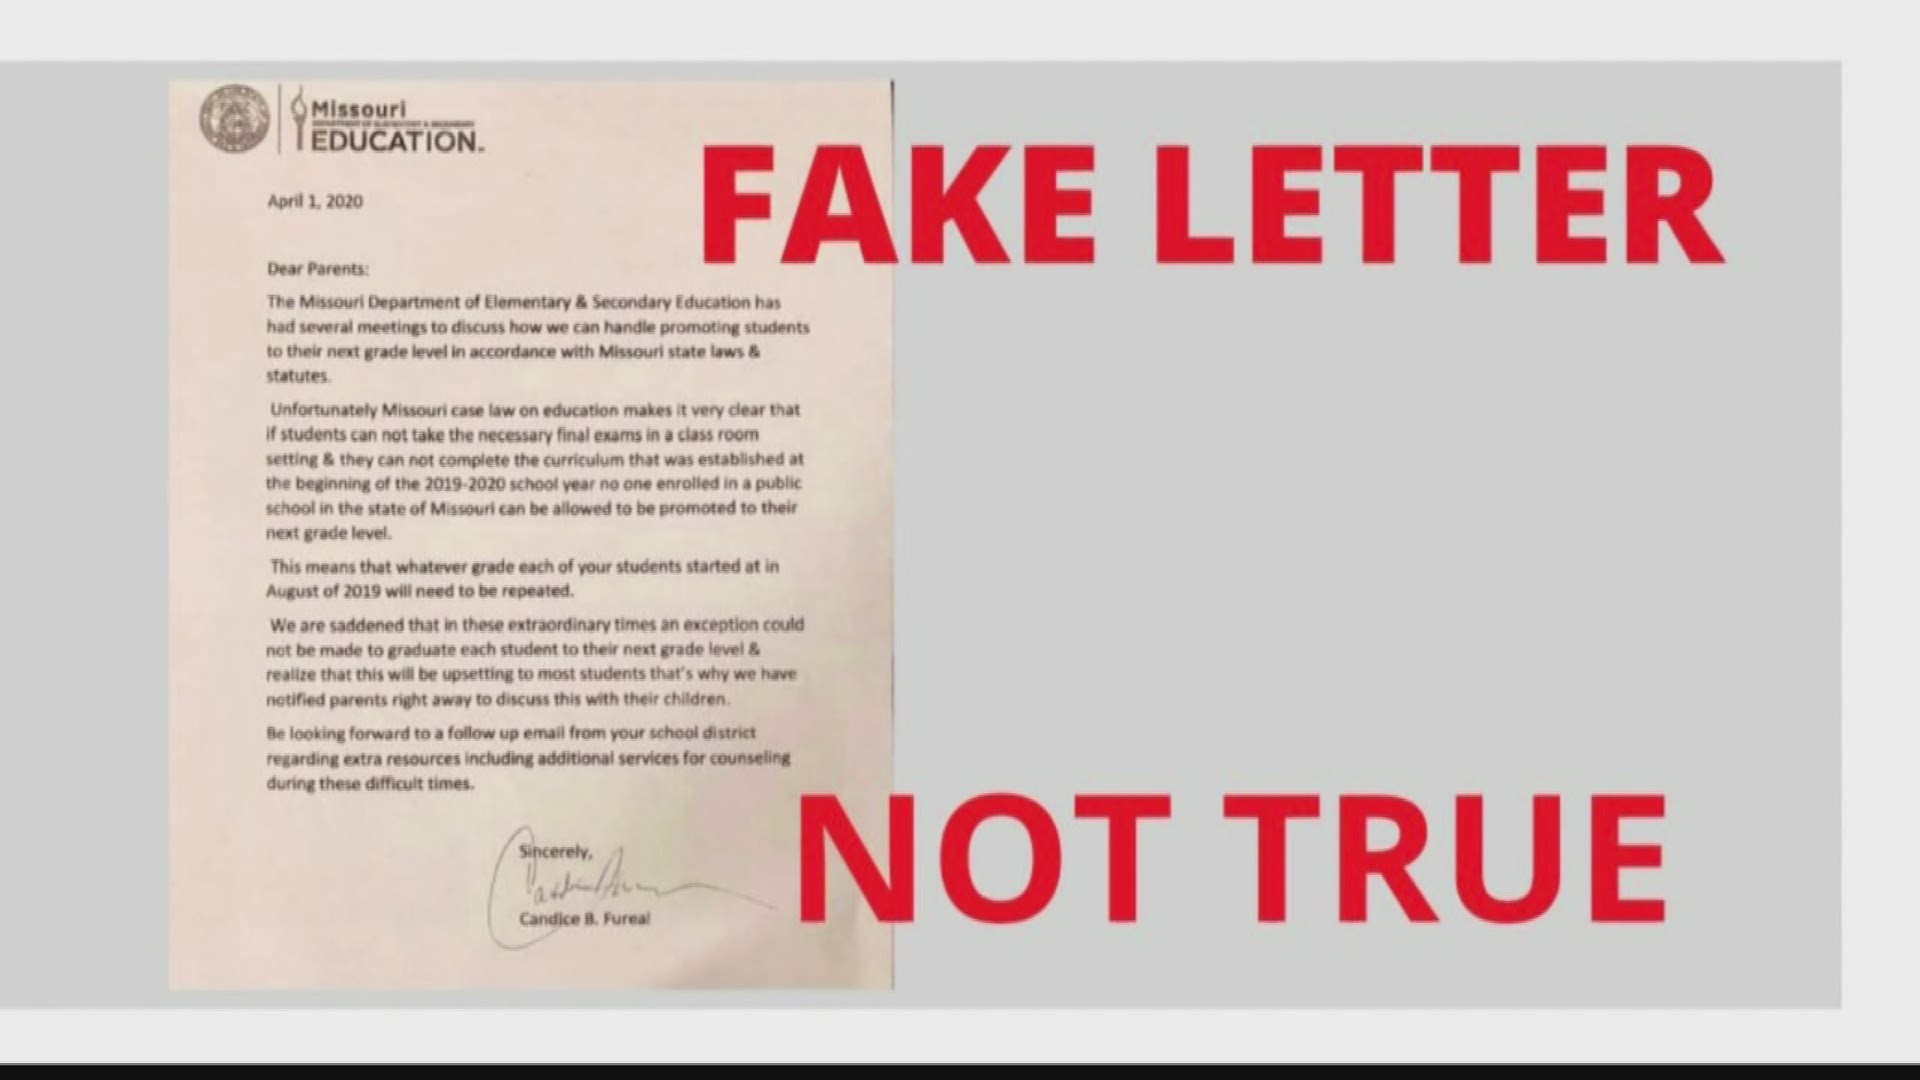 DESE said someone stole their logo to spread a fake letter claiming students in Missouri would not be able to advance a grade because of coronavirus changes